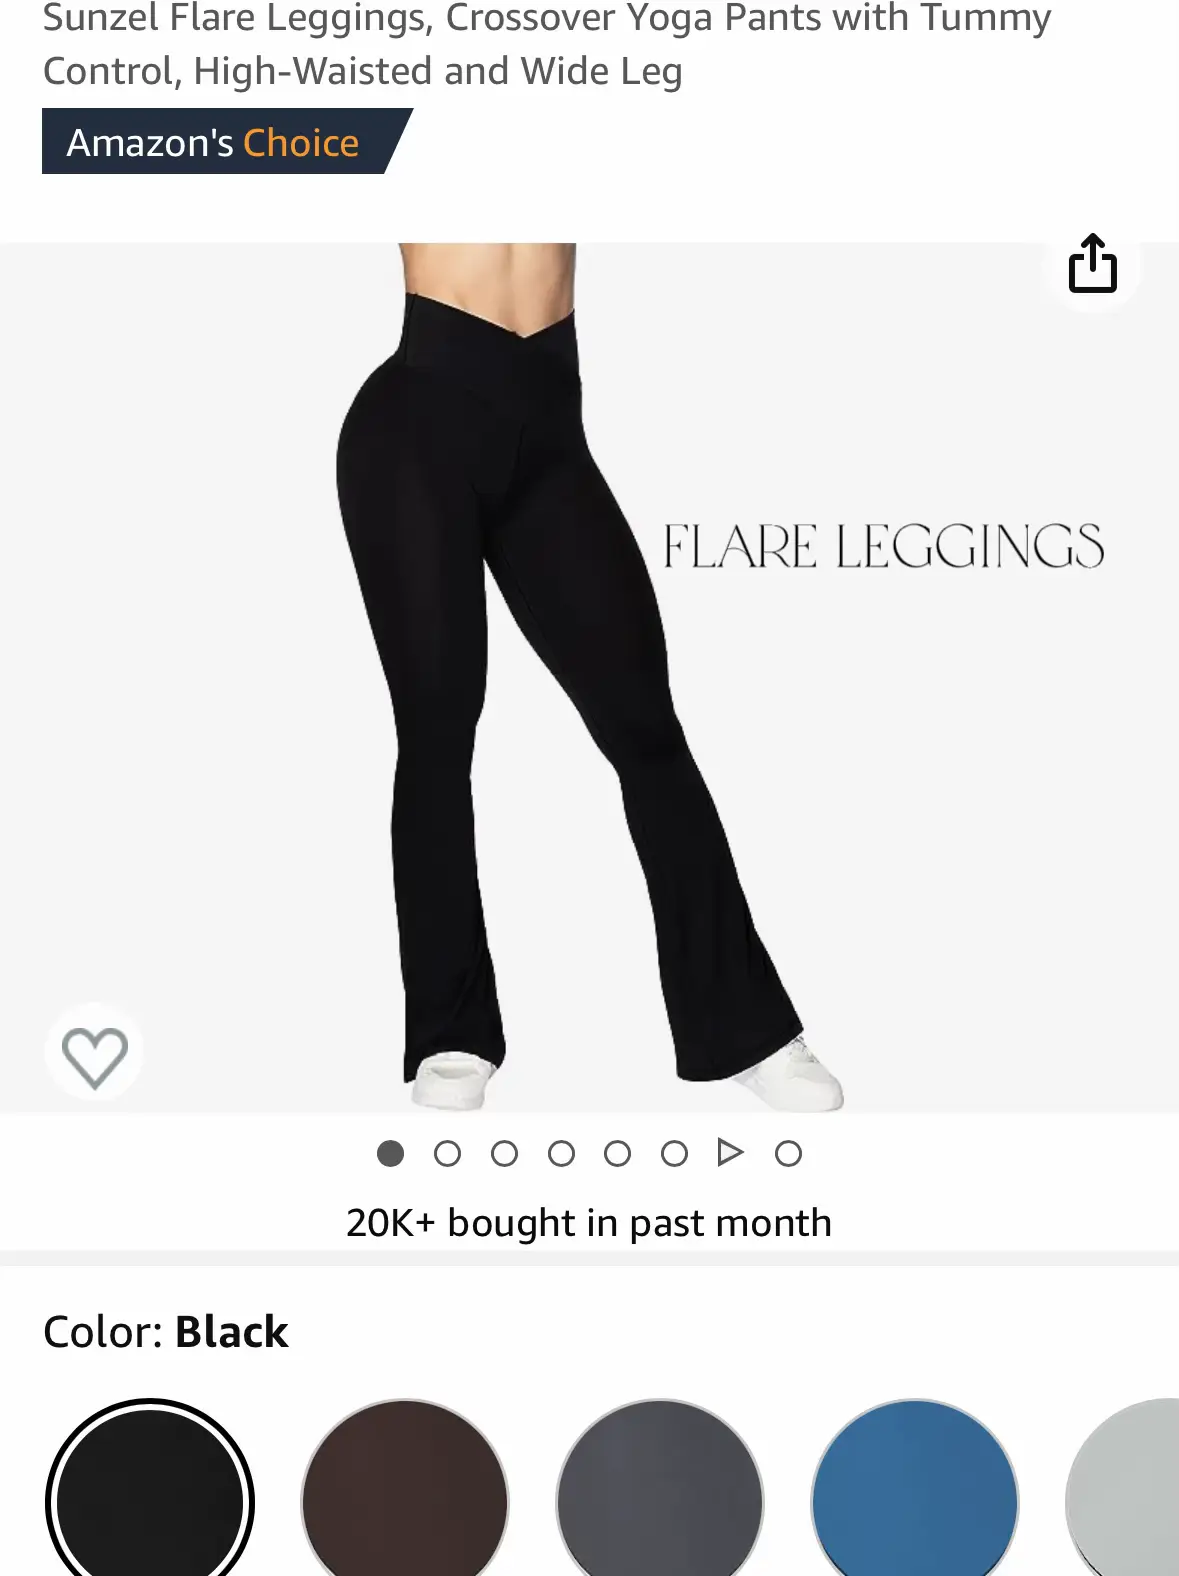 OMKAGI new in leggings✨ more color choice, gotta have a try